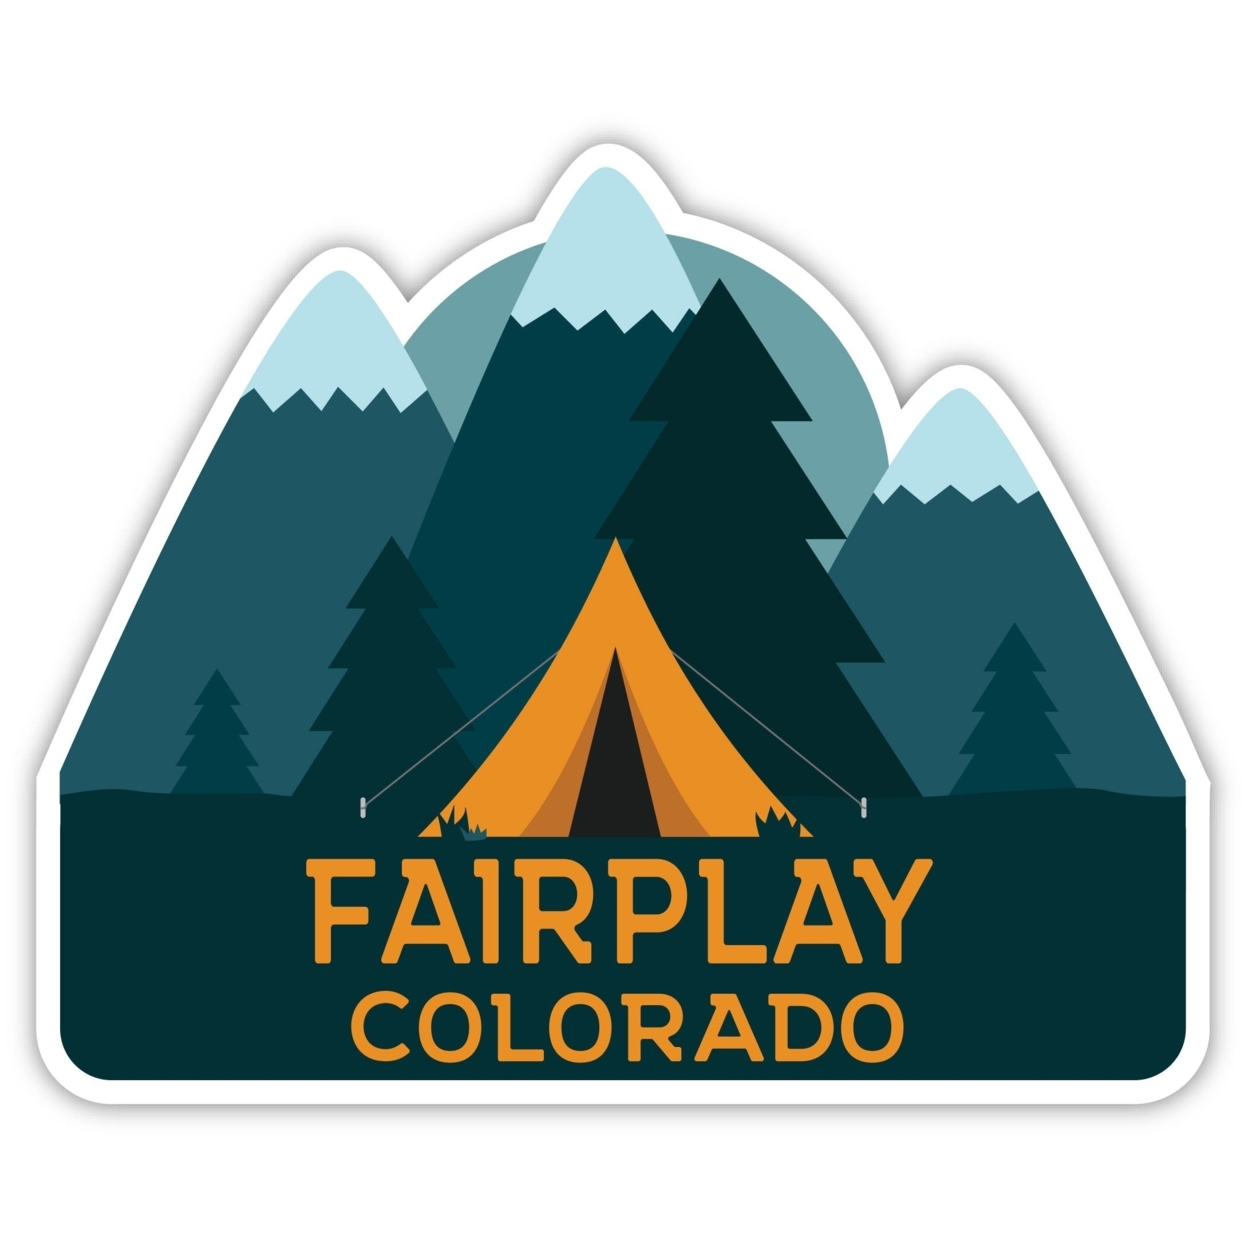 Fairplay Colorado Souvenir Decorative Stickers (Choose Theme And Size) - 4-Pack, 6-Inch, Adventures Awaits